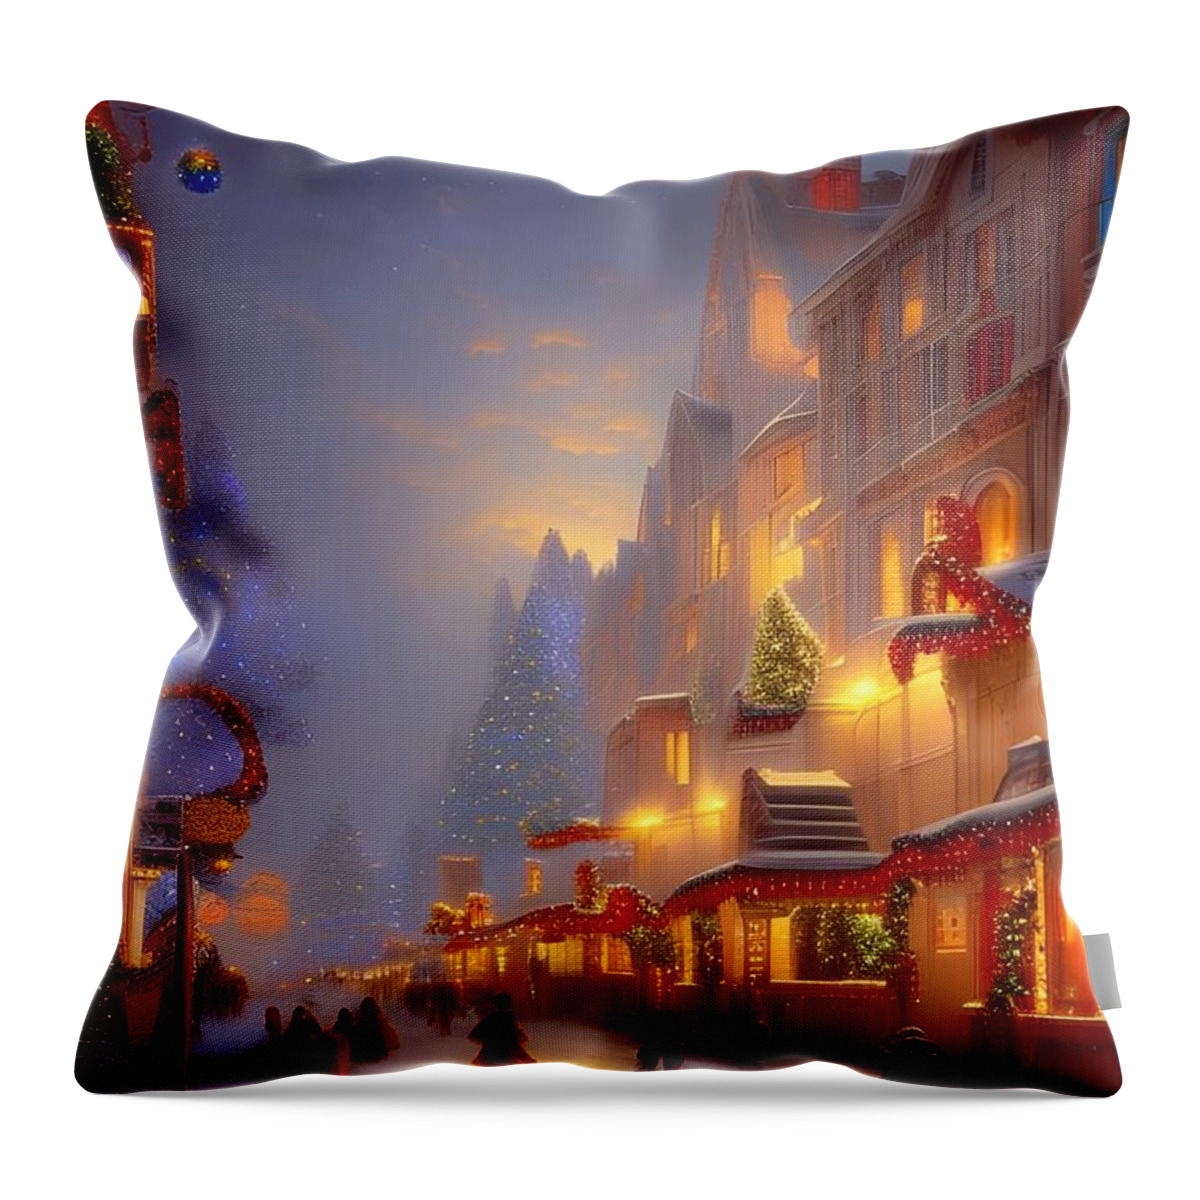 Digital Christmas Snow Shopping Throw Pillow featuring the digital art Snowy Christmas Shopping by Beverly Read